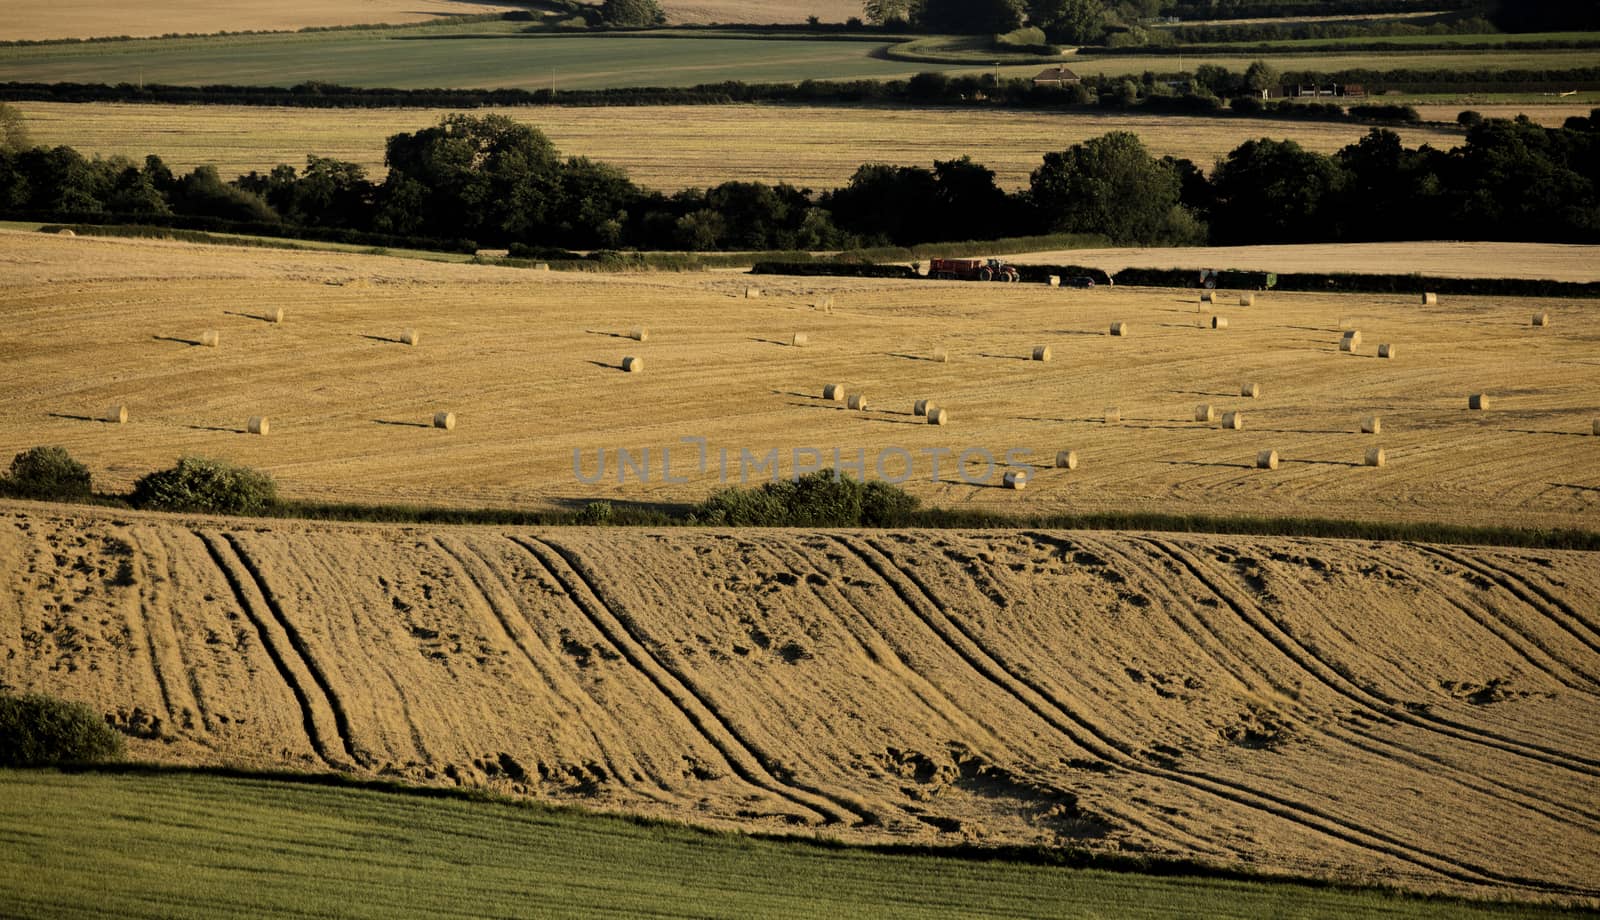 Near Belchford, Lincolnshire, UK, July 2017, View of hay bales south of the Bluestone Heath Road in the Lincolnshire Wolds